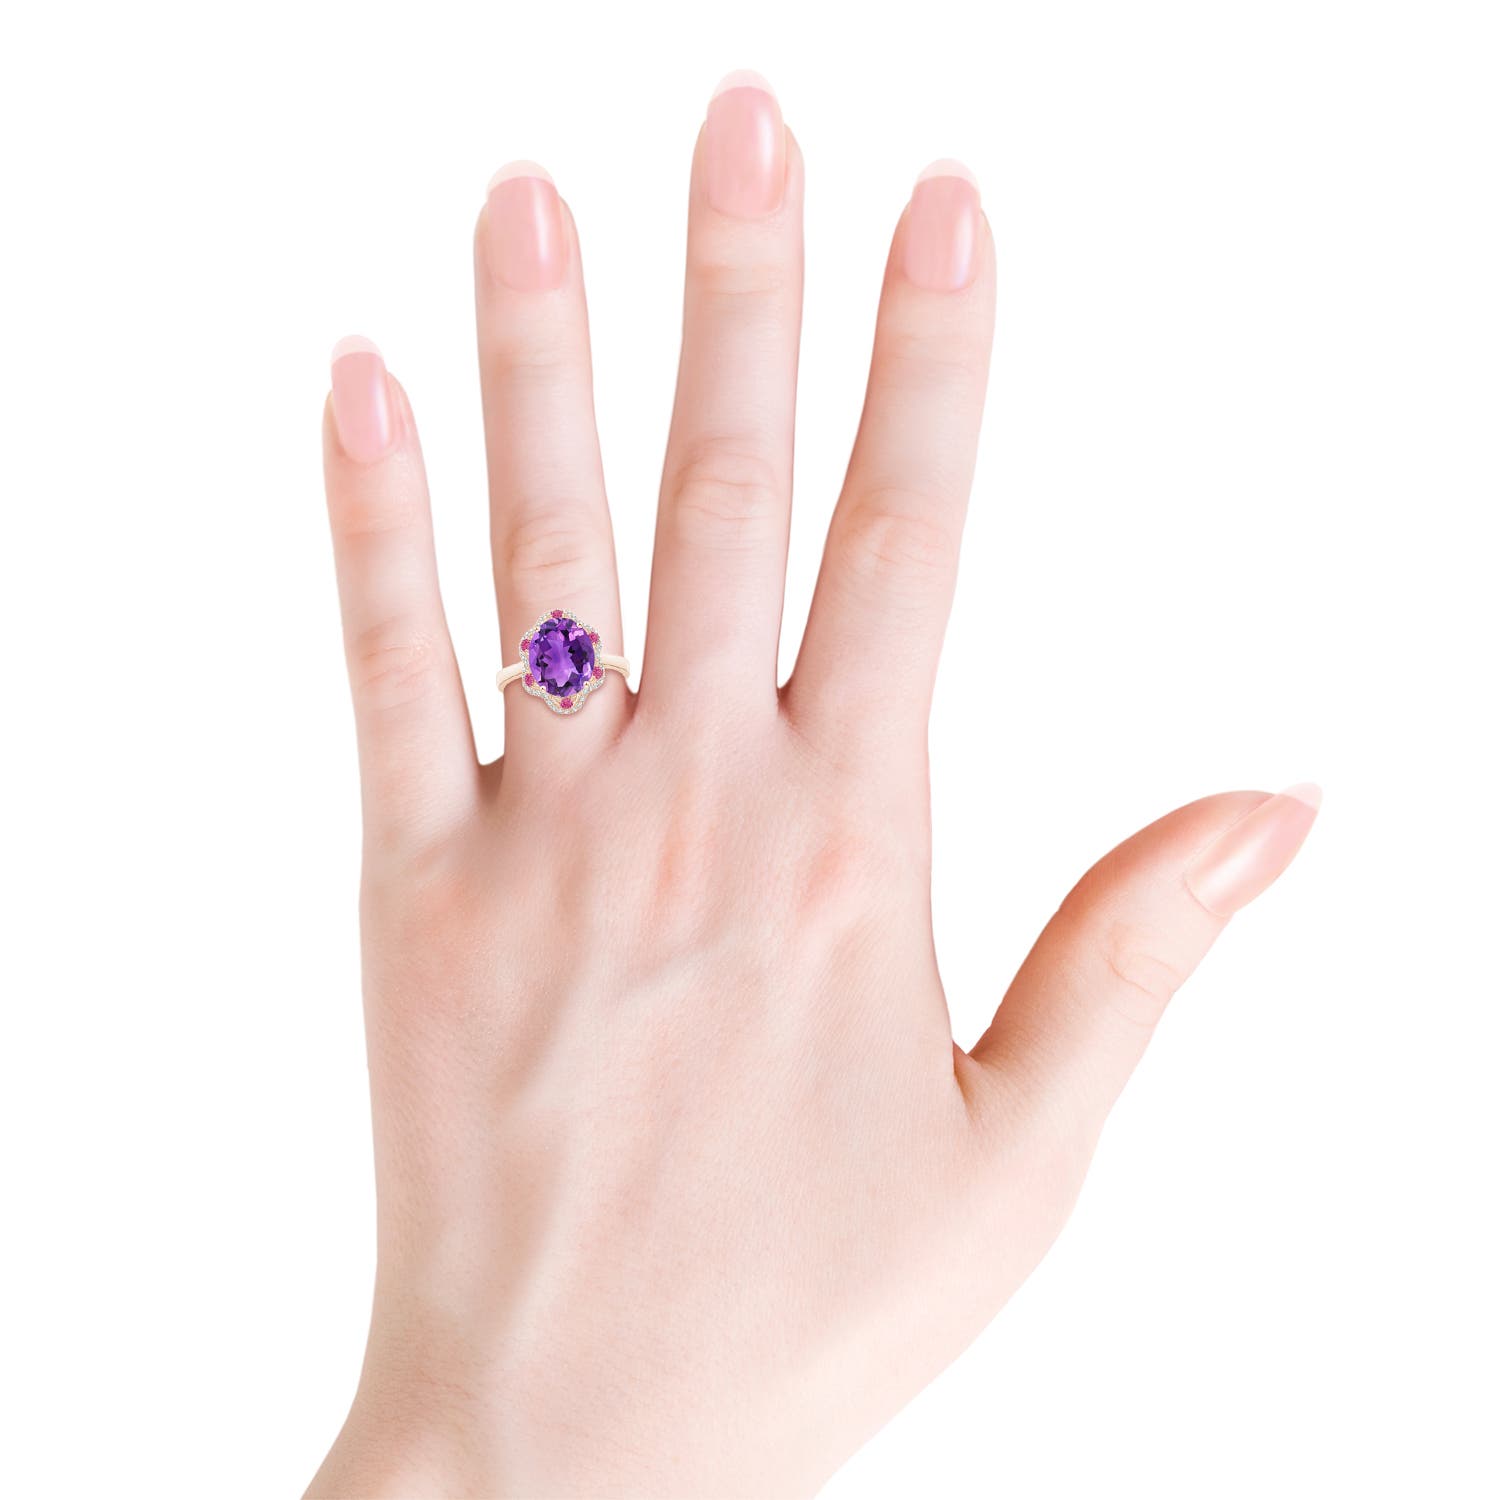 AAA - Amethyst / 3.48 CT / 14 KT Rose Gold